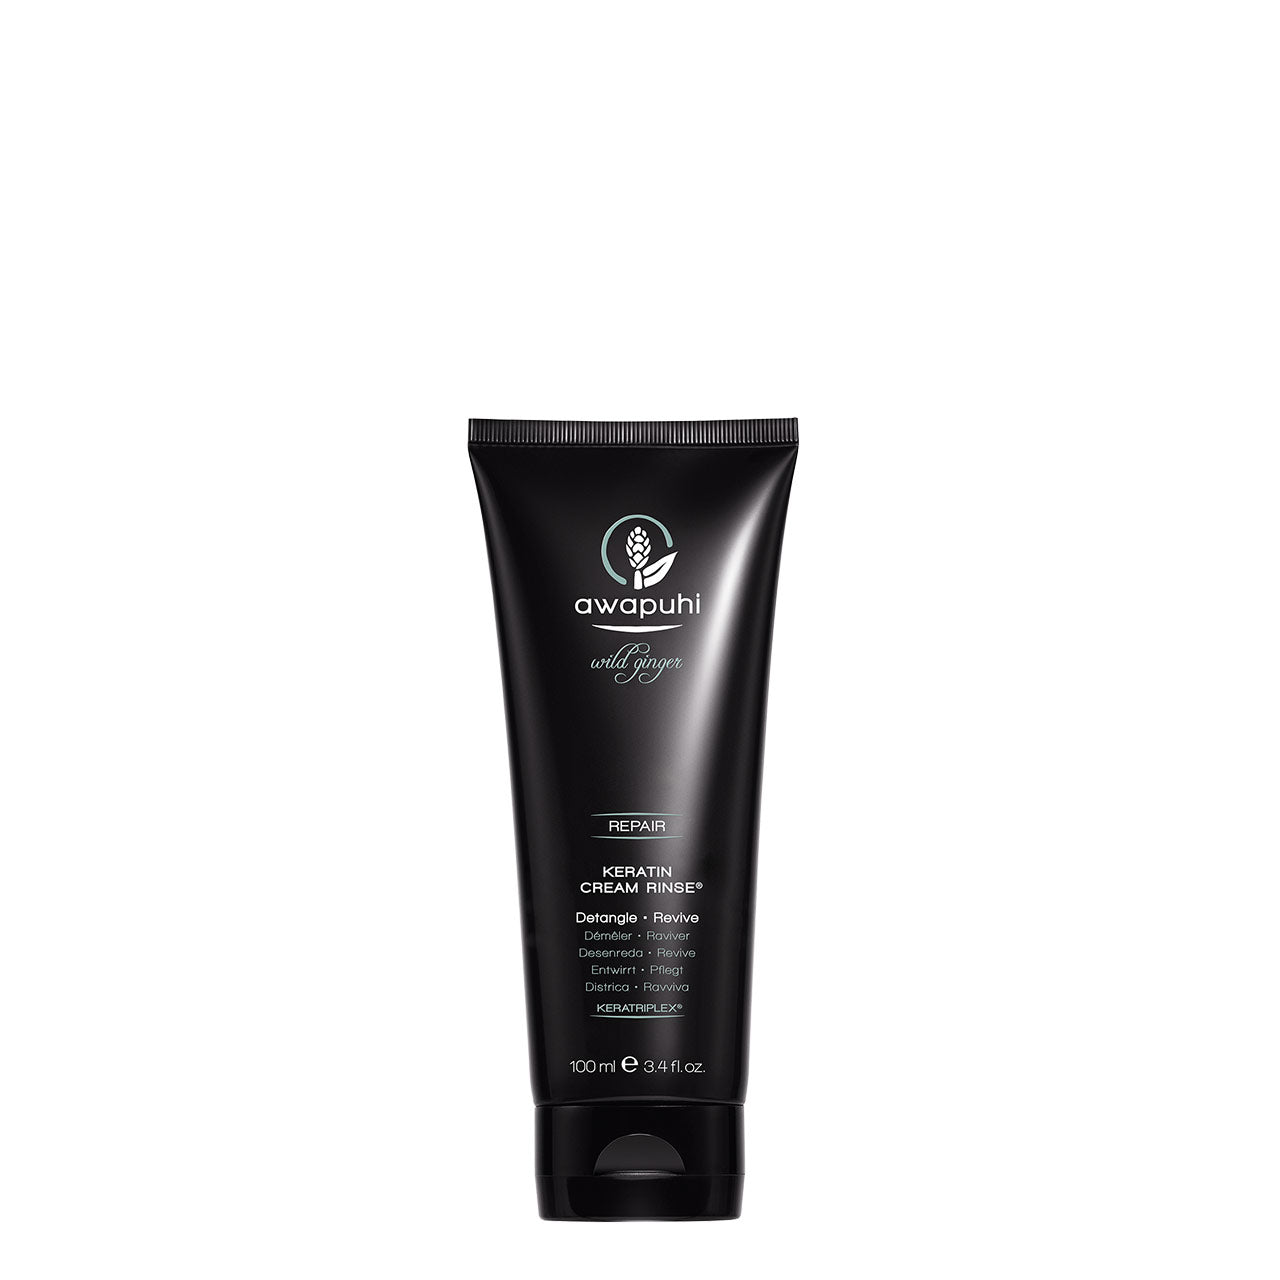 Awapuhi Wild Ginger Repair Keratin Cream Rinse - 100ML - by Paul Mitchell |ProCare Outlet|